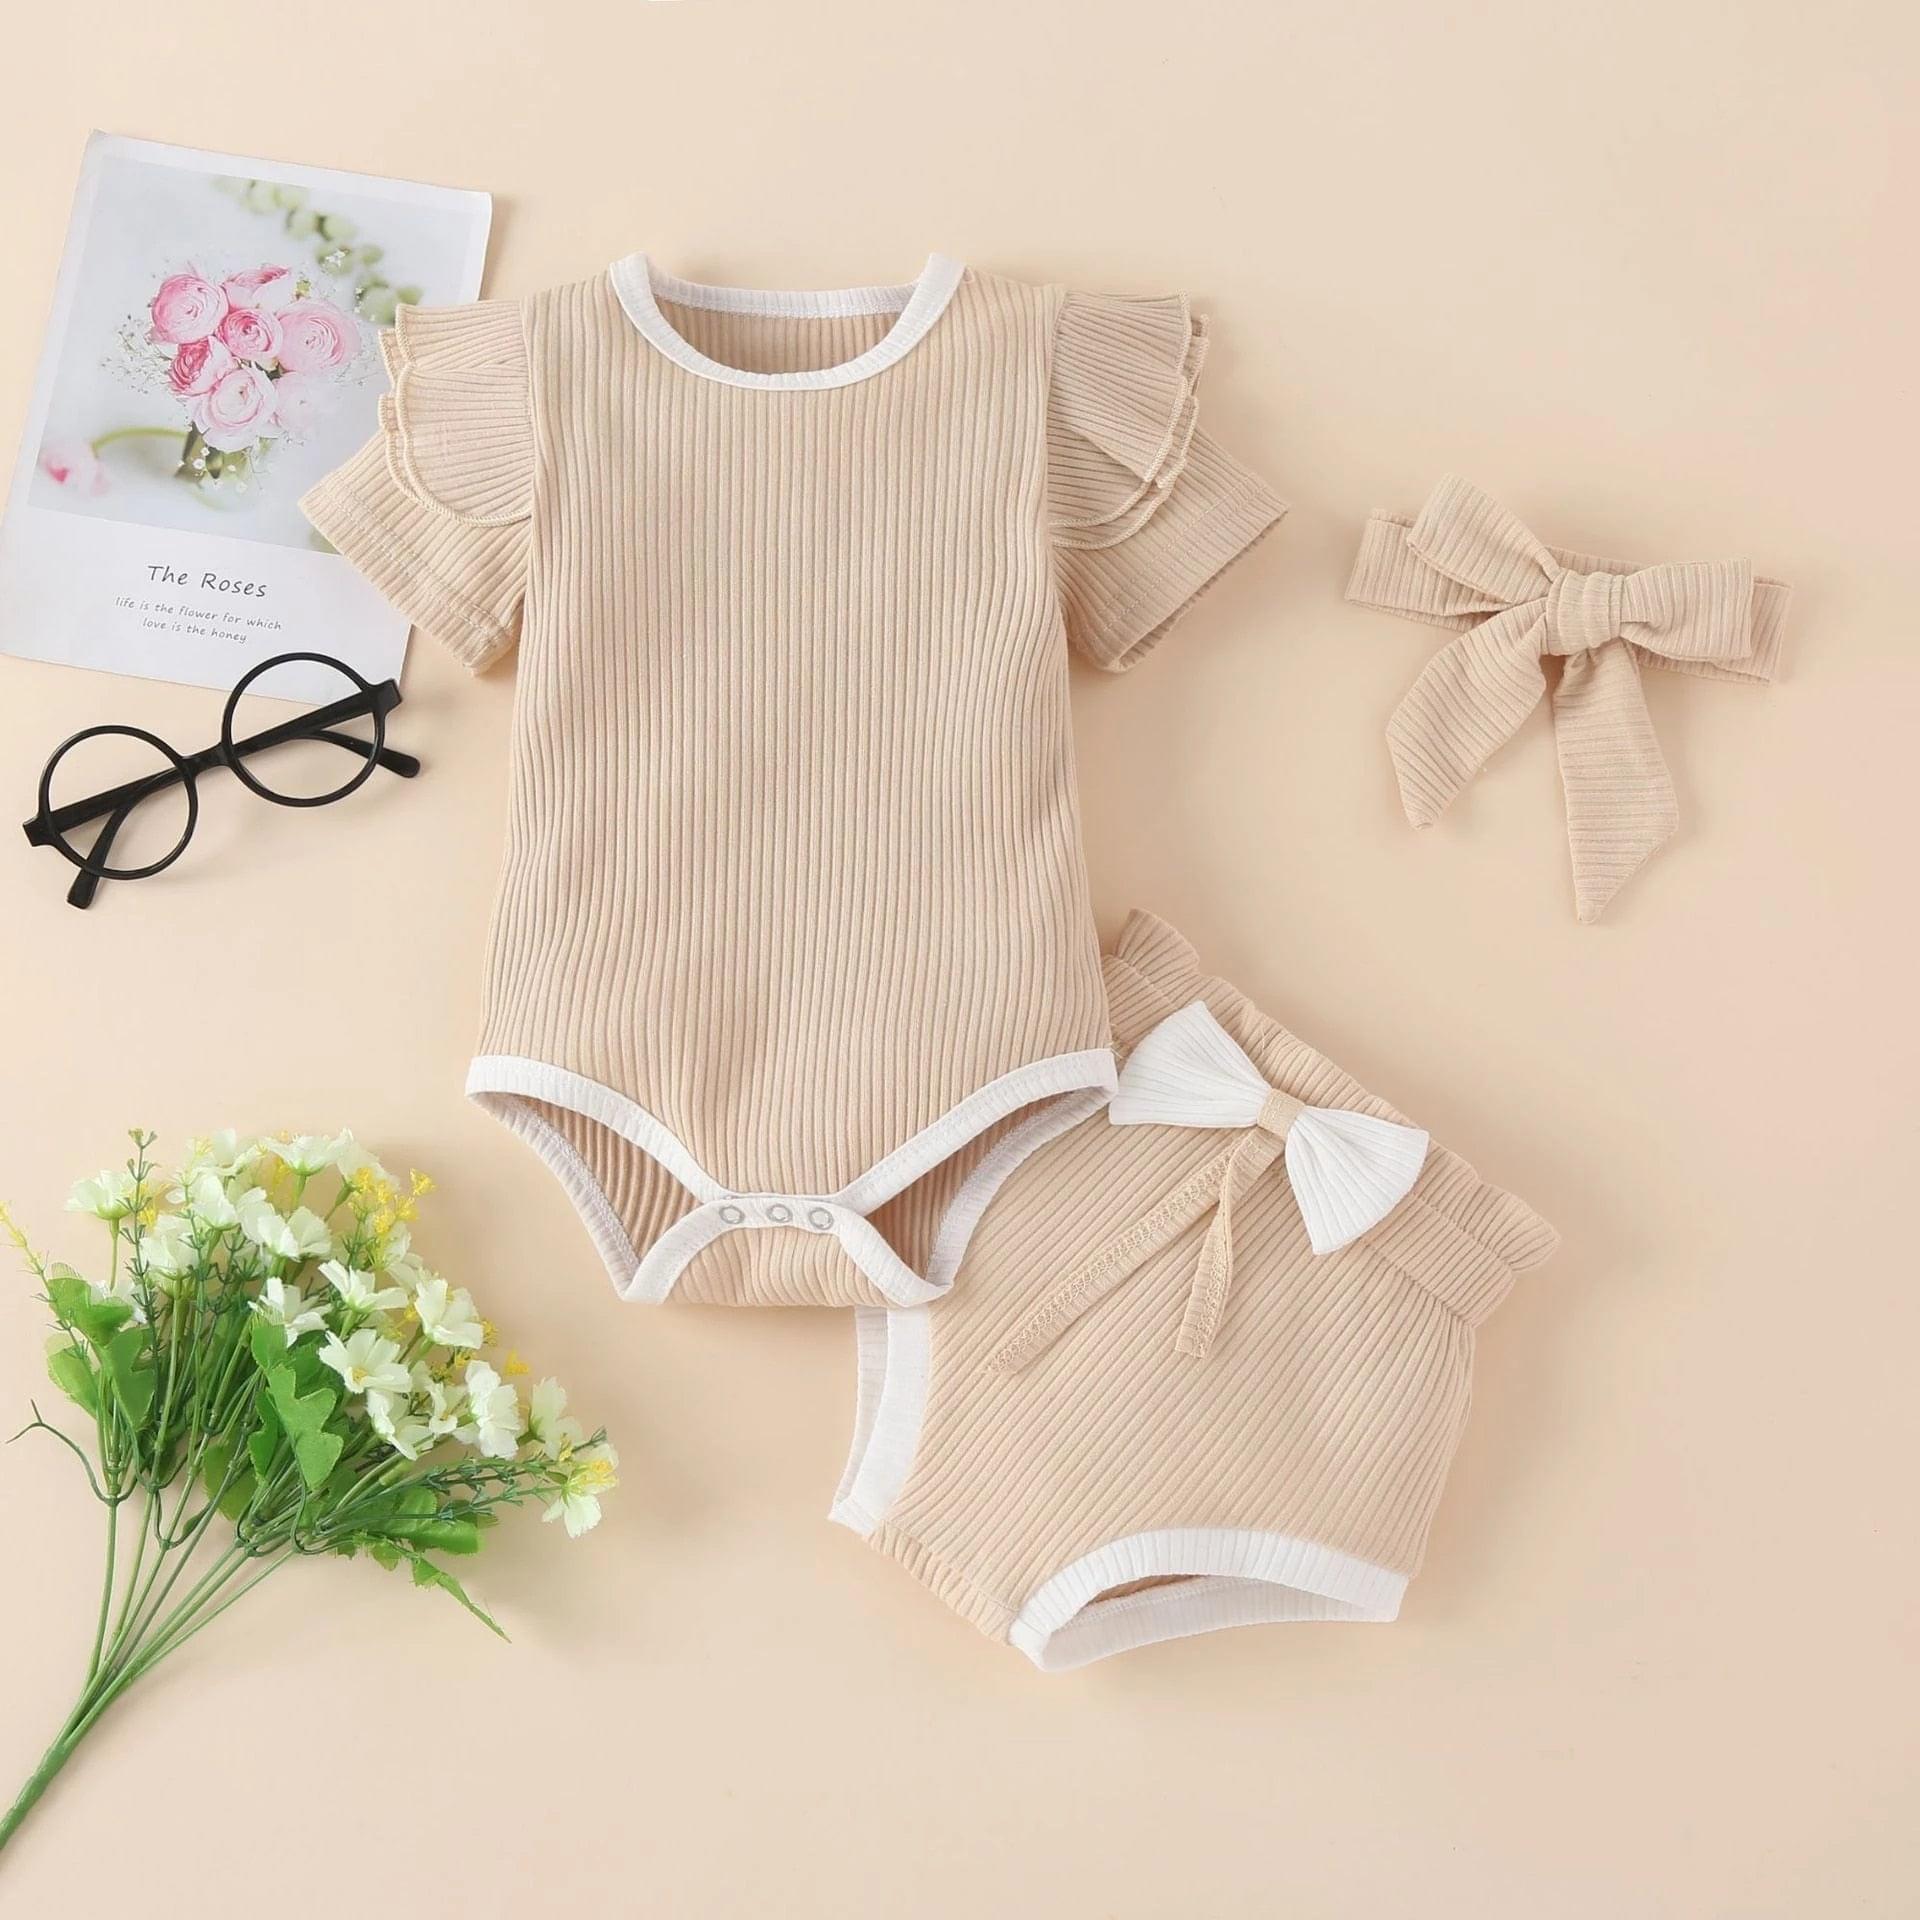 Autumn and winter foreign trade children's clothing solid color pit striped cotton long-sleeved romper with bowknot trousers three-piece suit